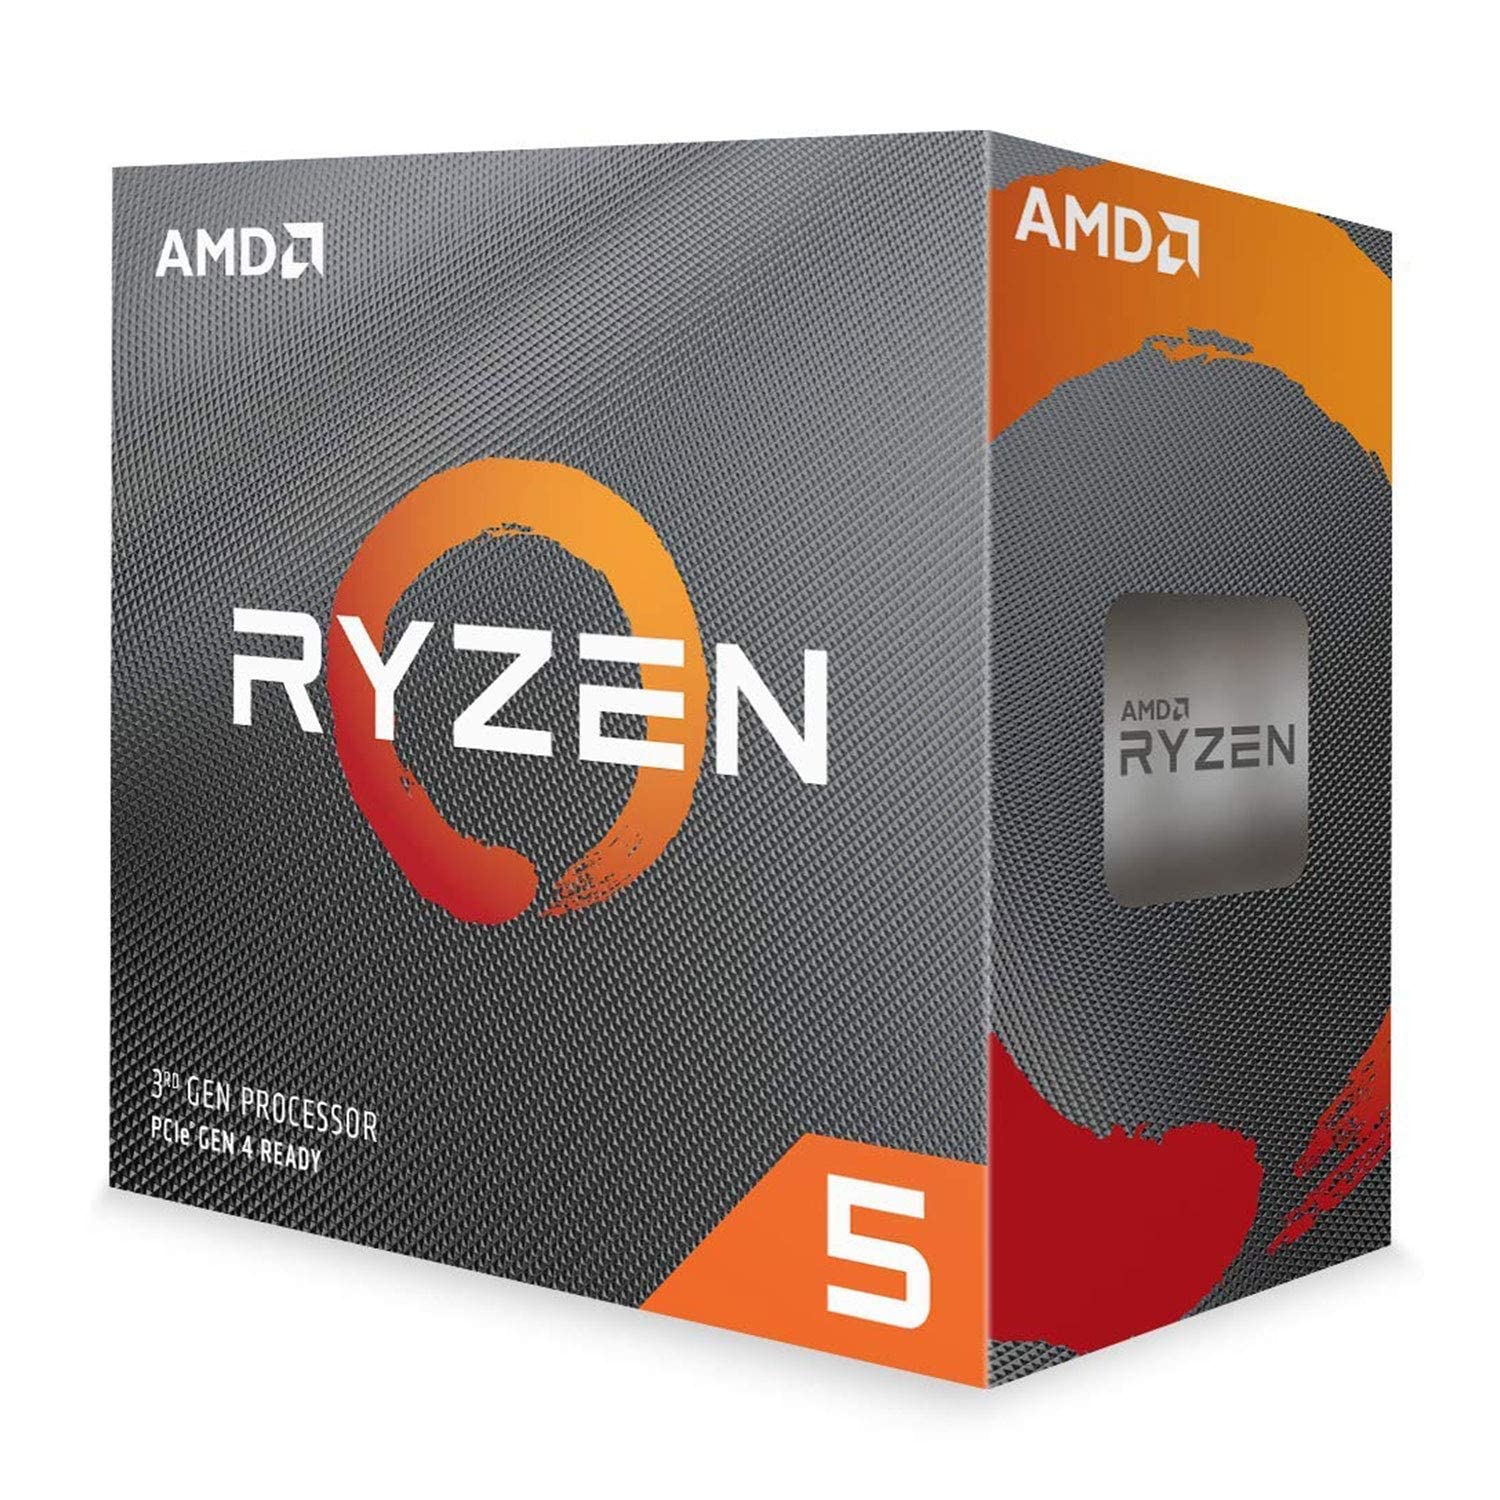 You are currently viewing Comparing AMD Ryzen 5 5600G vs 5600X Specs